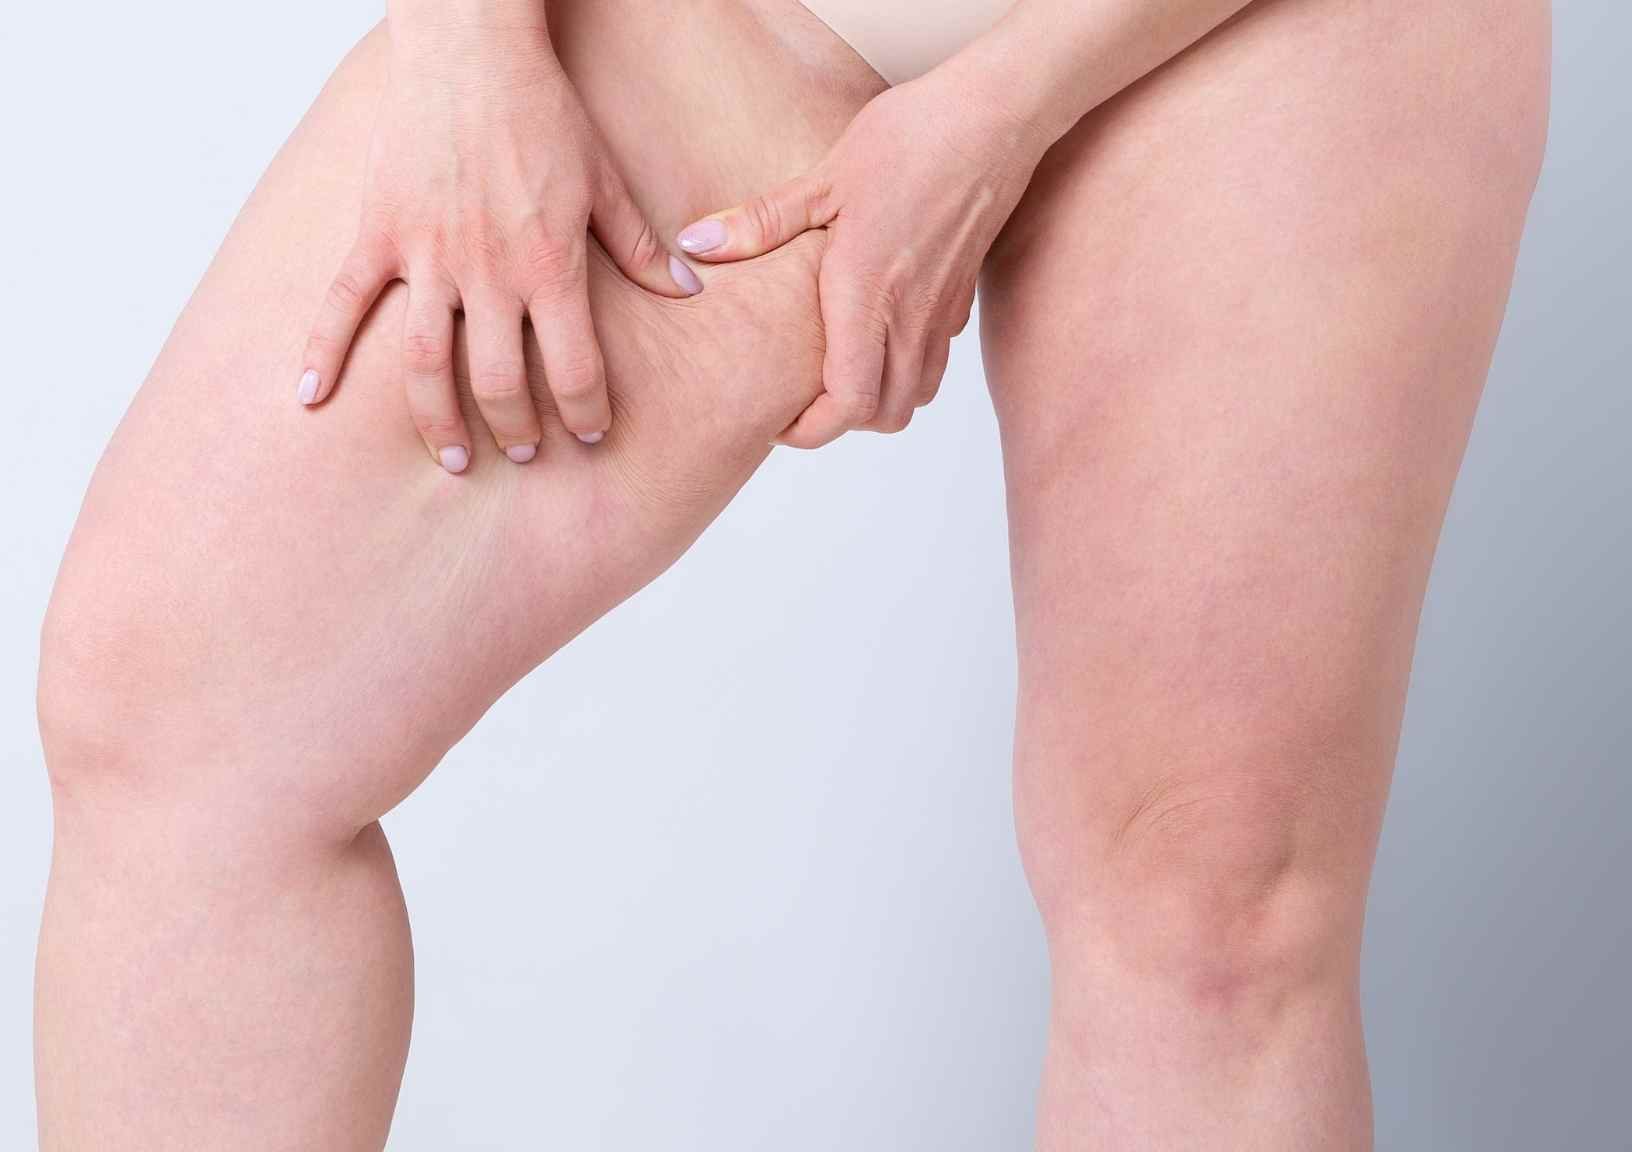 A Summer Without Chafed Thighs? This Is How You Can Make It Happen